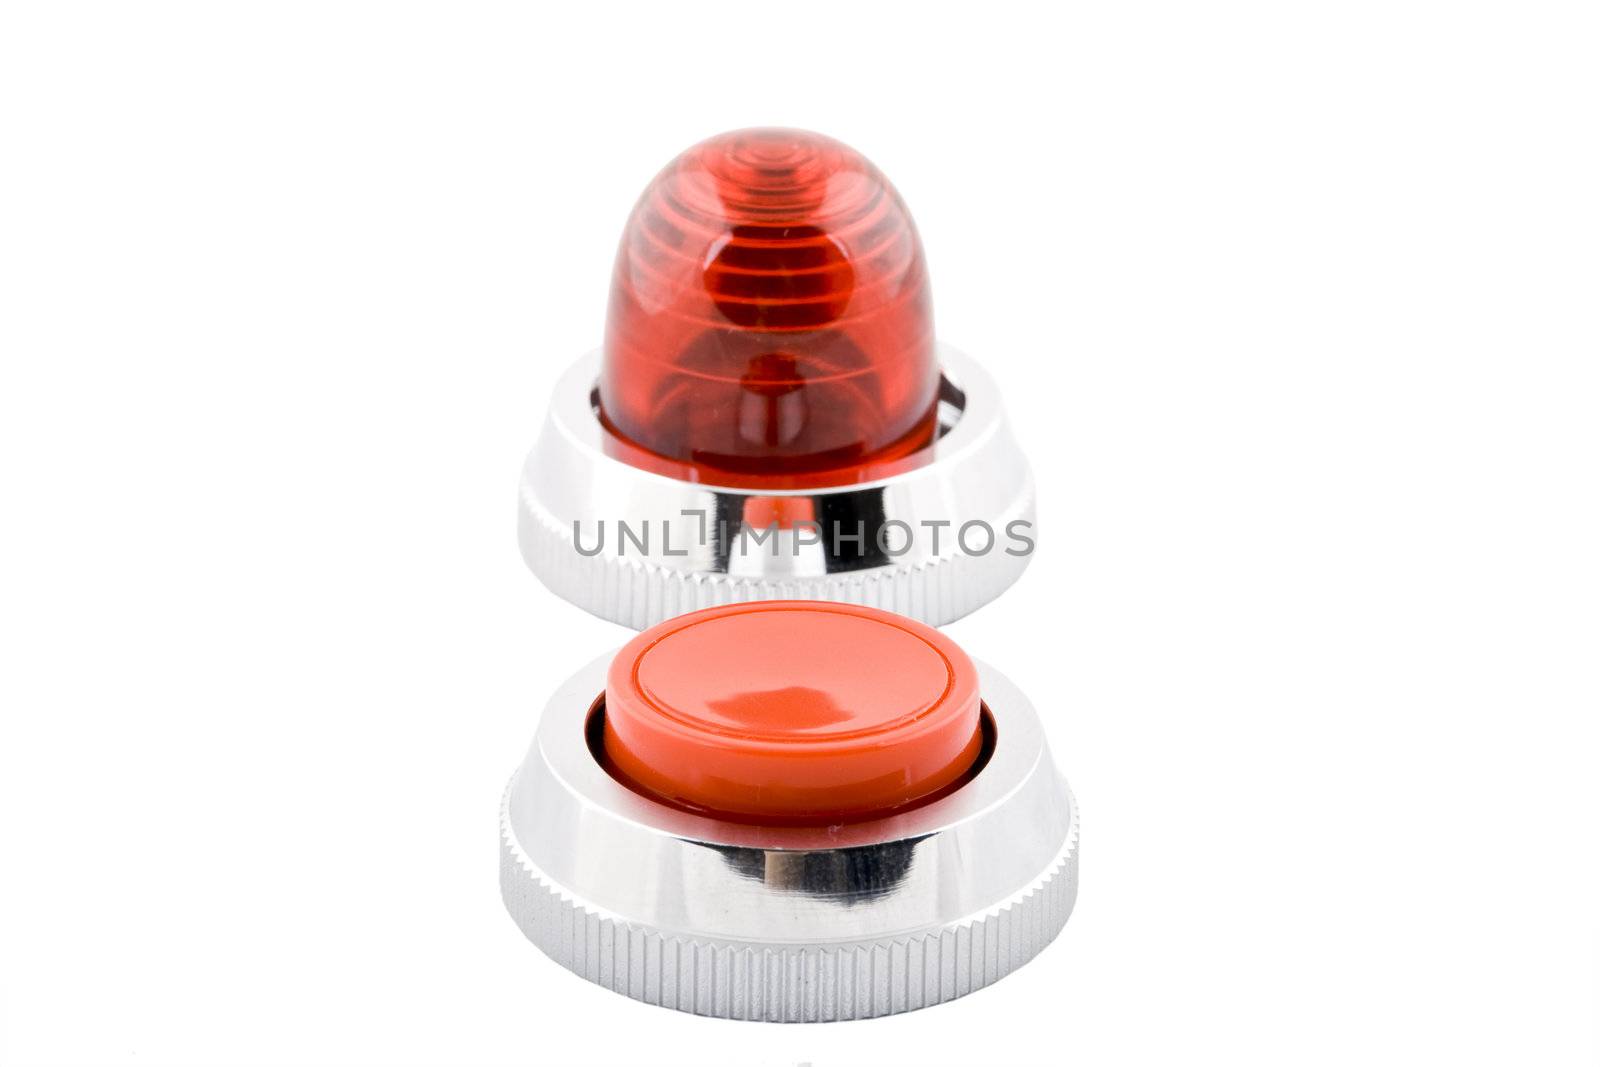 Power button and status indicator light on white background